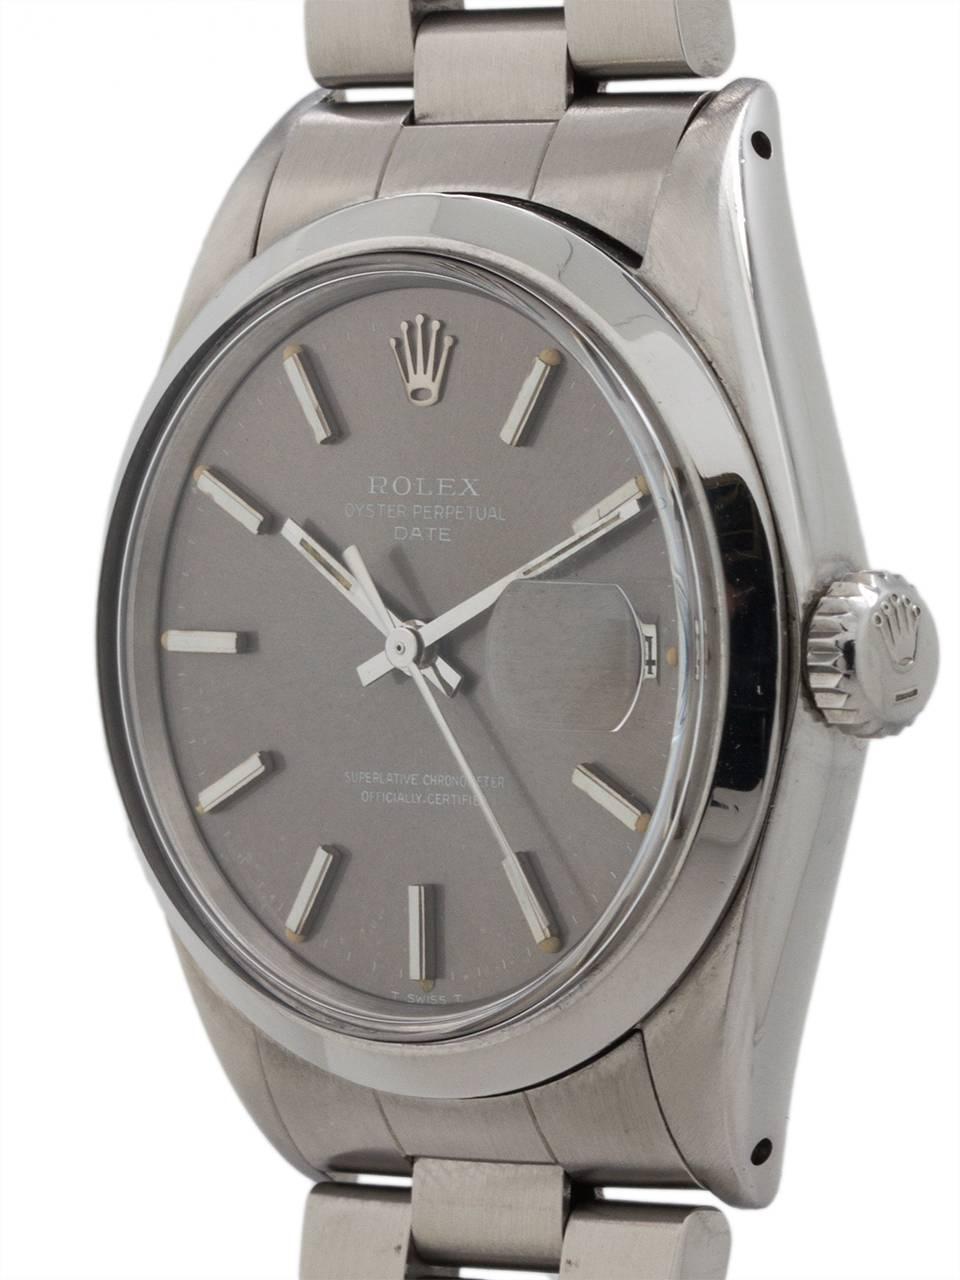 
Rolex Oyster Perpetual Date ref 1500 serial # 2.3 million circa 1969. Featuring 34mm diameter stainless steel case with smooth bezel and acrylic crystal. With scarce original gray dial with applied silver indexes and silver baton hands.. Powered by